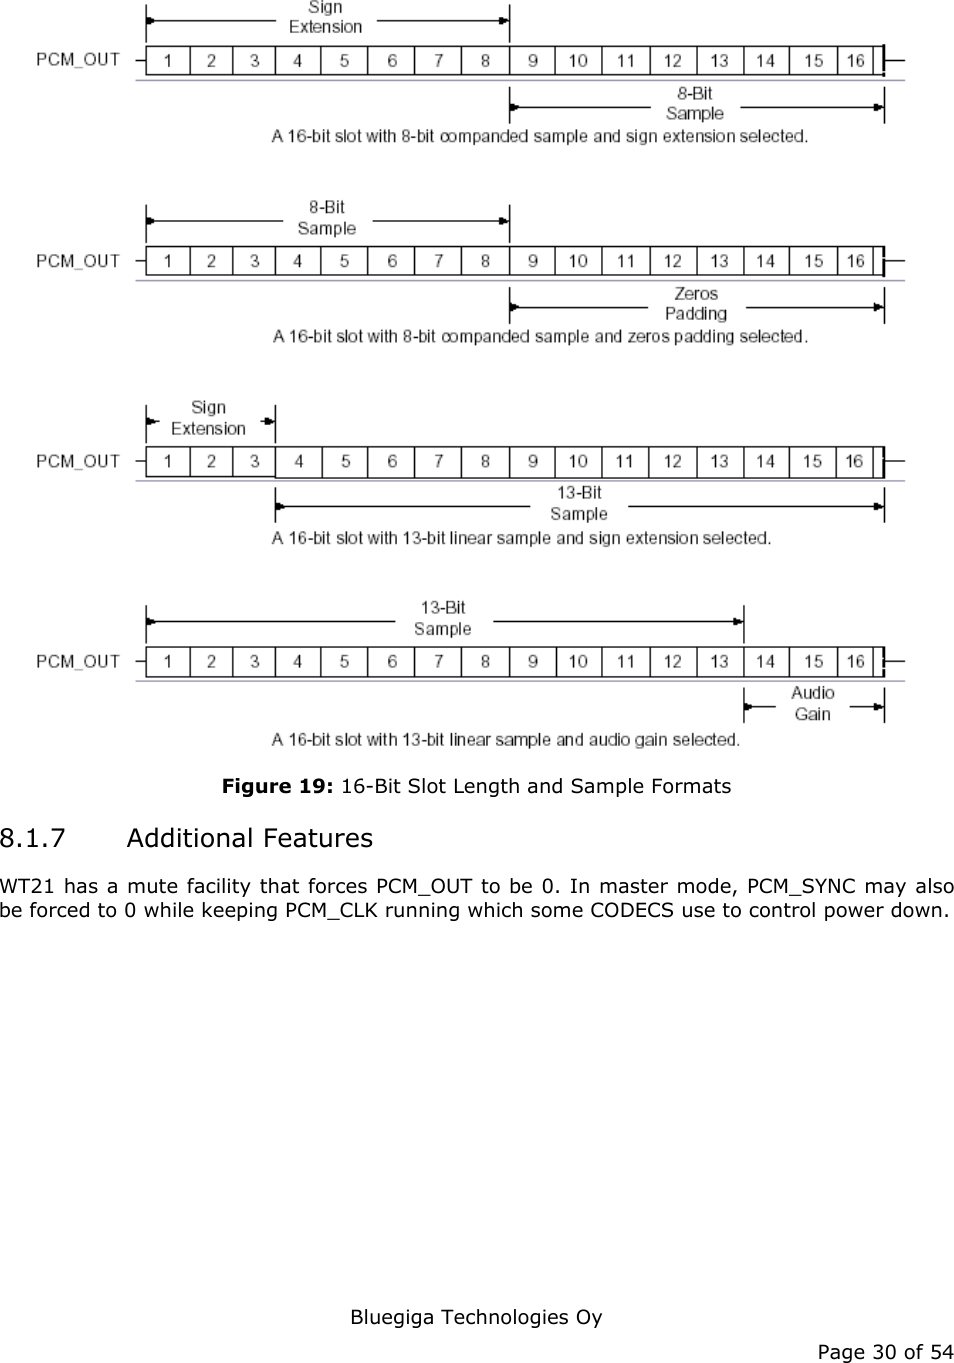   Bluegiga Technologies Oy Page 30 of 54  Figure 19: 16-Bit Slot Length and Sample Formats 8.1.7 Additional Features WT21 has a mute facility that forces PCM_OUT to be 0. In master mode, PCM_SYNC may also be forced to 0 while keeping PCM_CLK running which some CODECS use to control power down. 